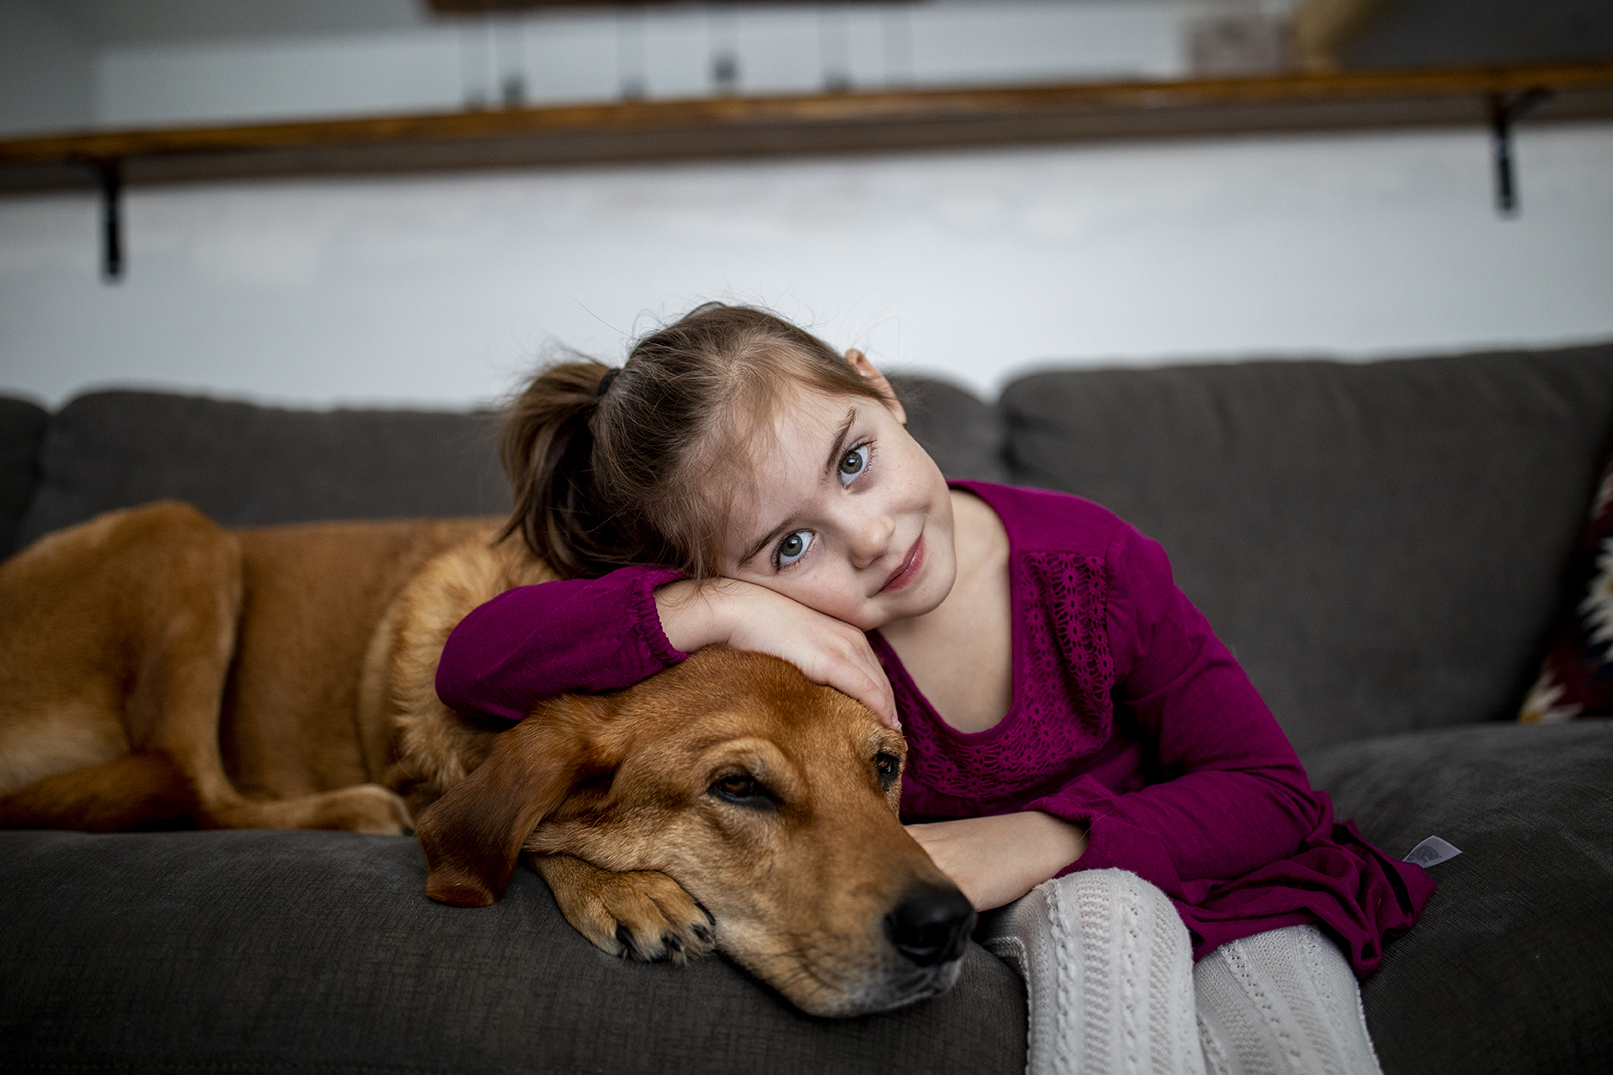 Little girl sitting on a sofa, hugging a brown dog.